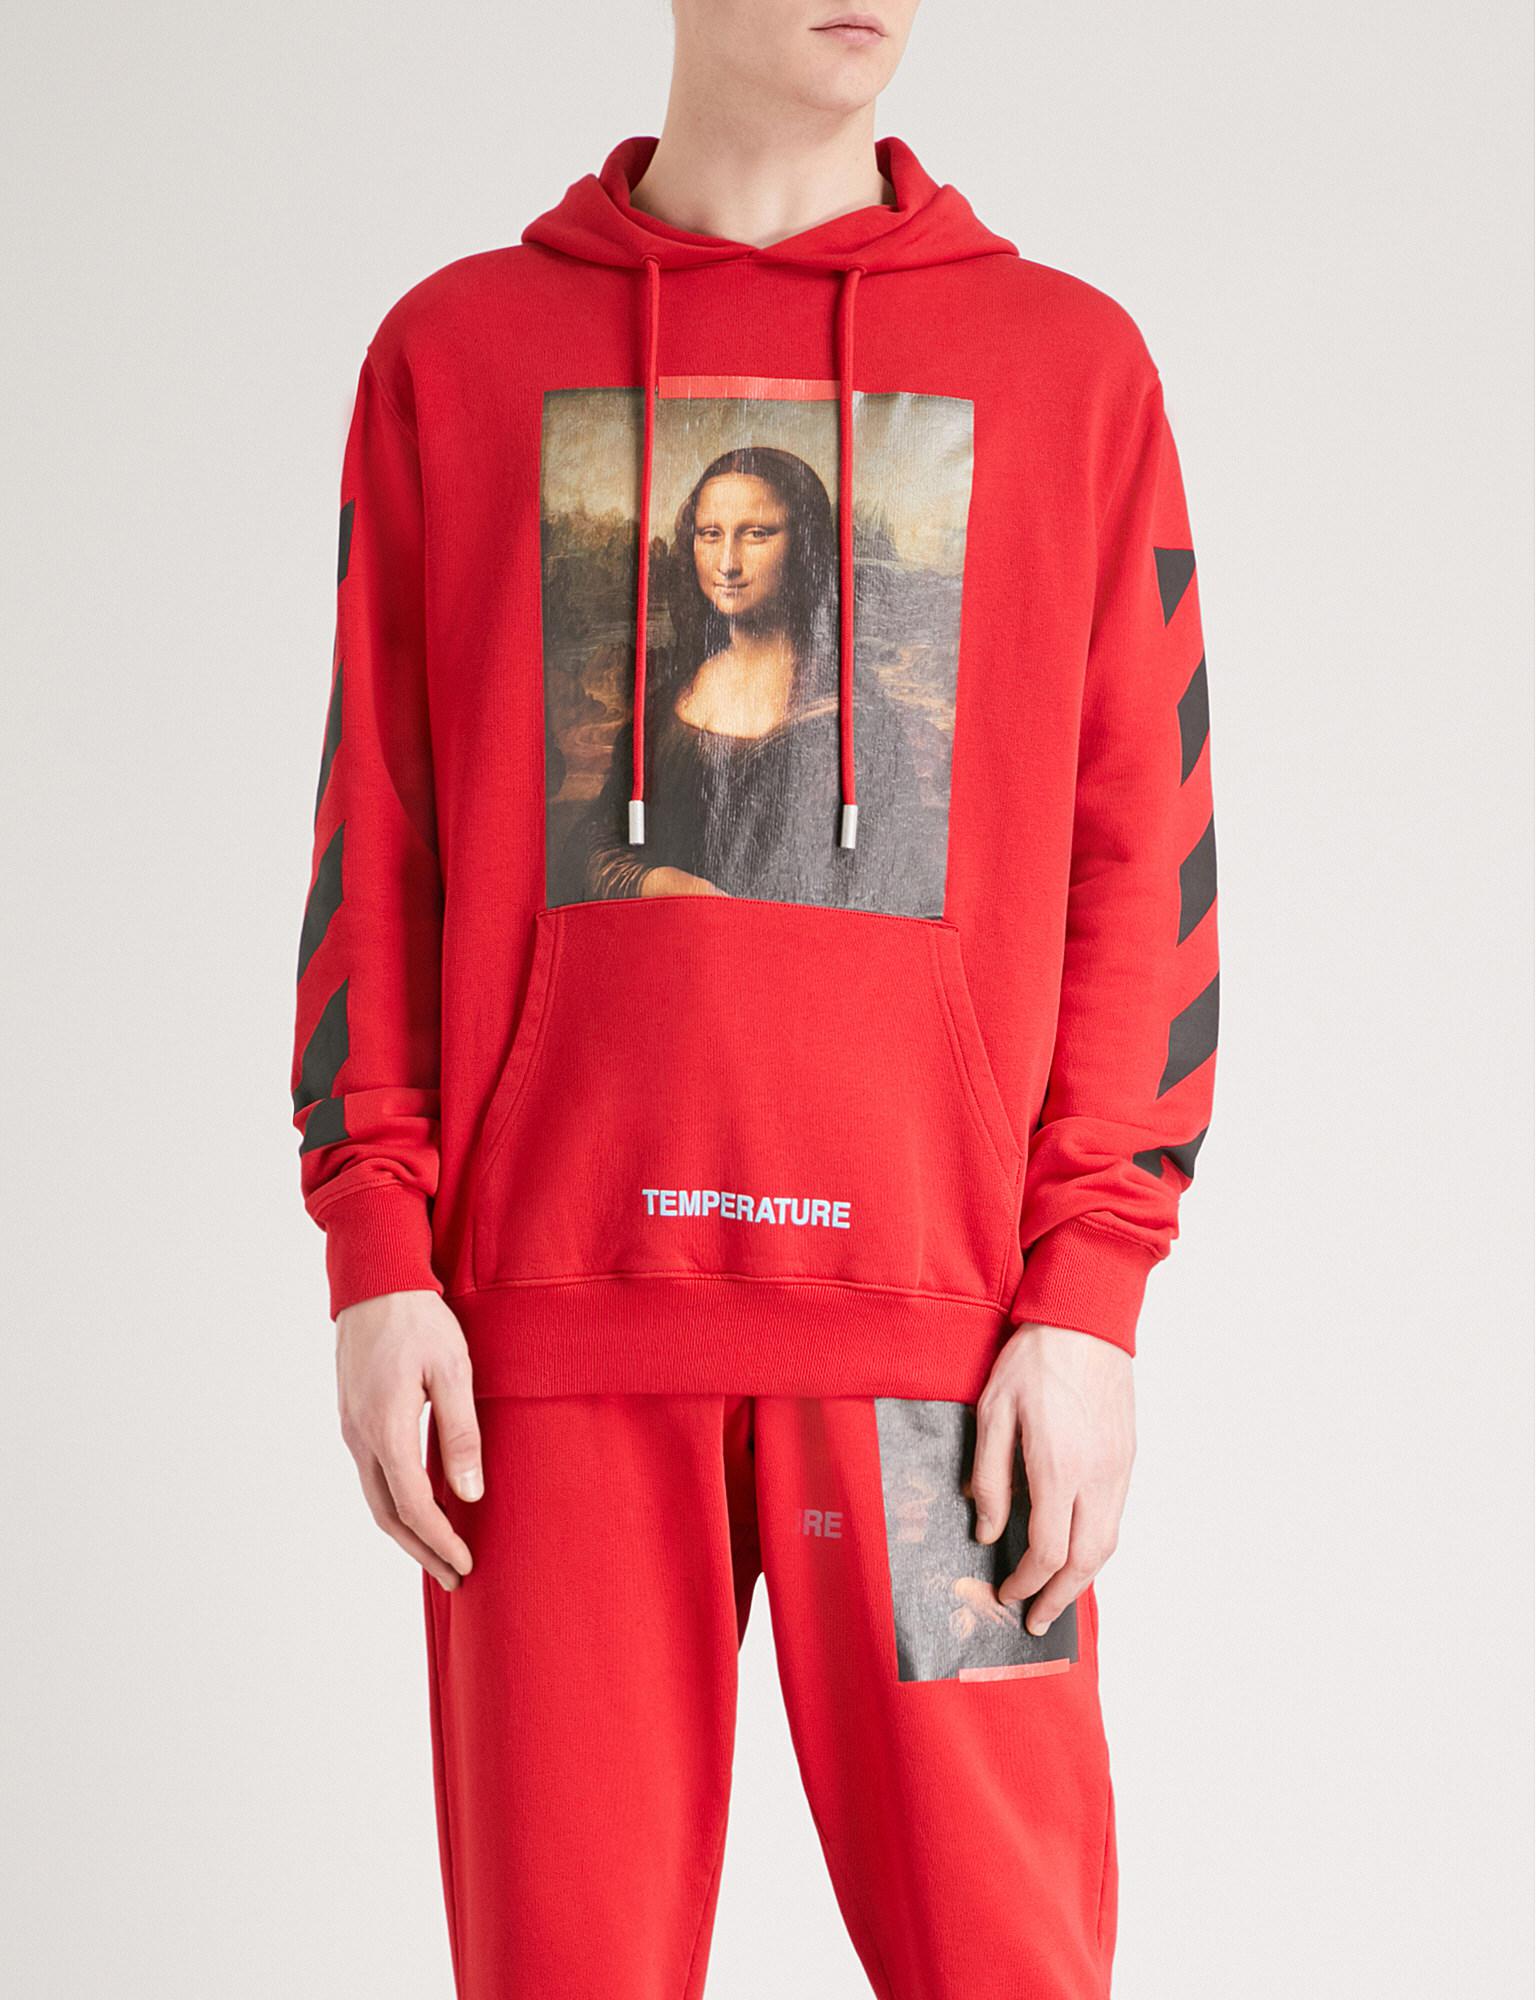 Off-White c/o Virgil Abloh Mona Lisa Cotton-jersey Hoody in Red for Men - Lyst